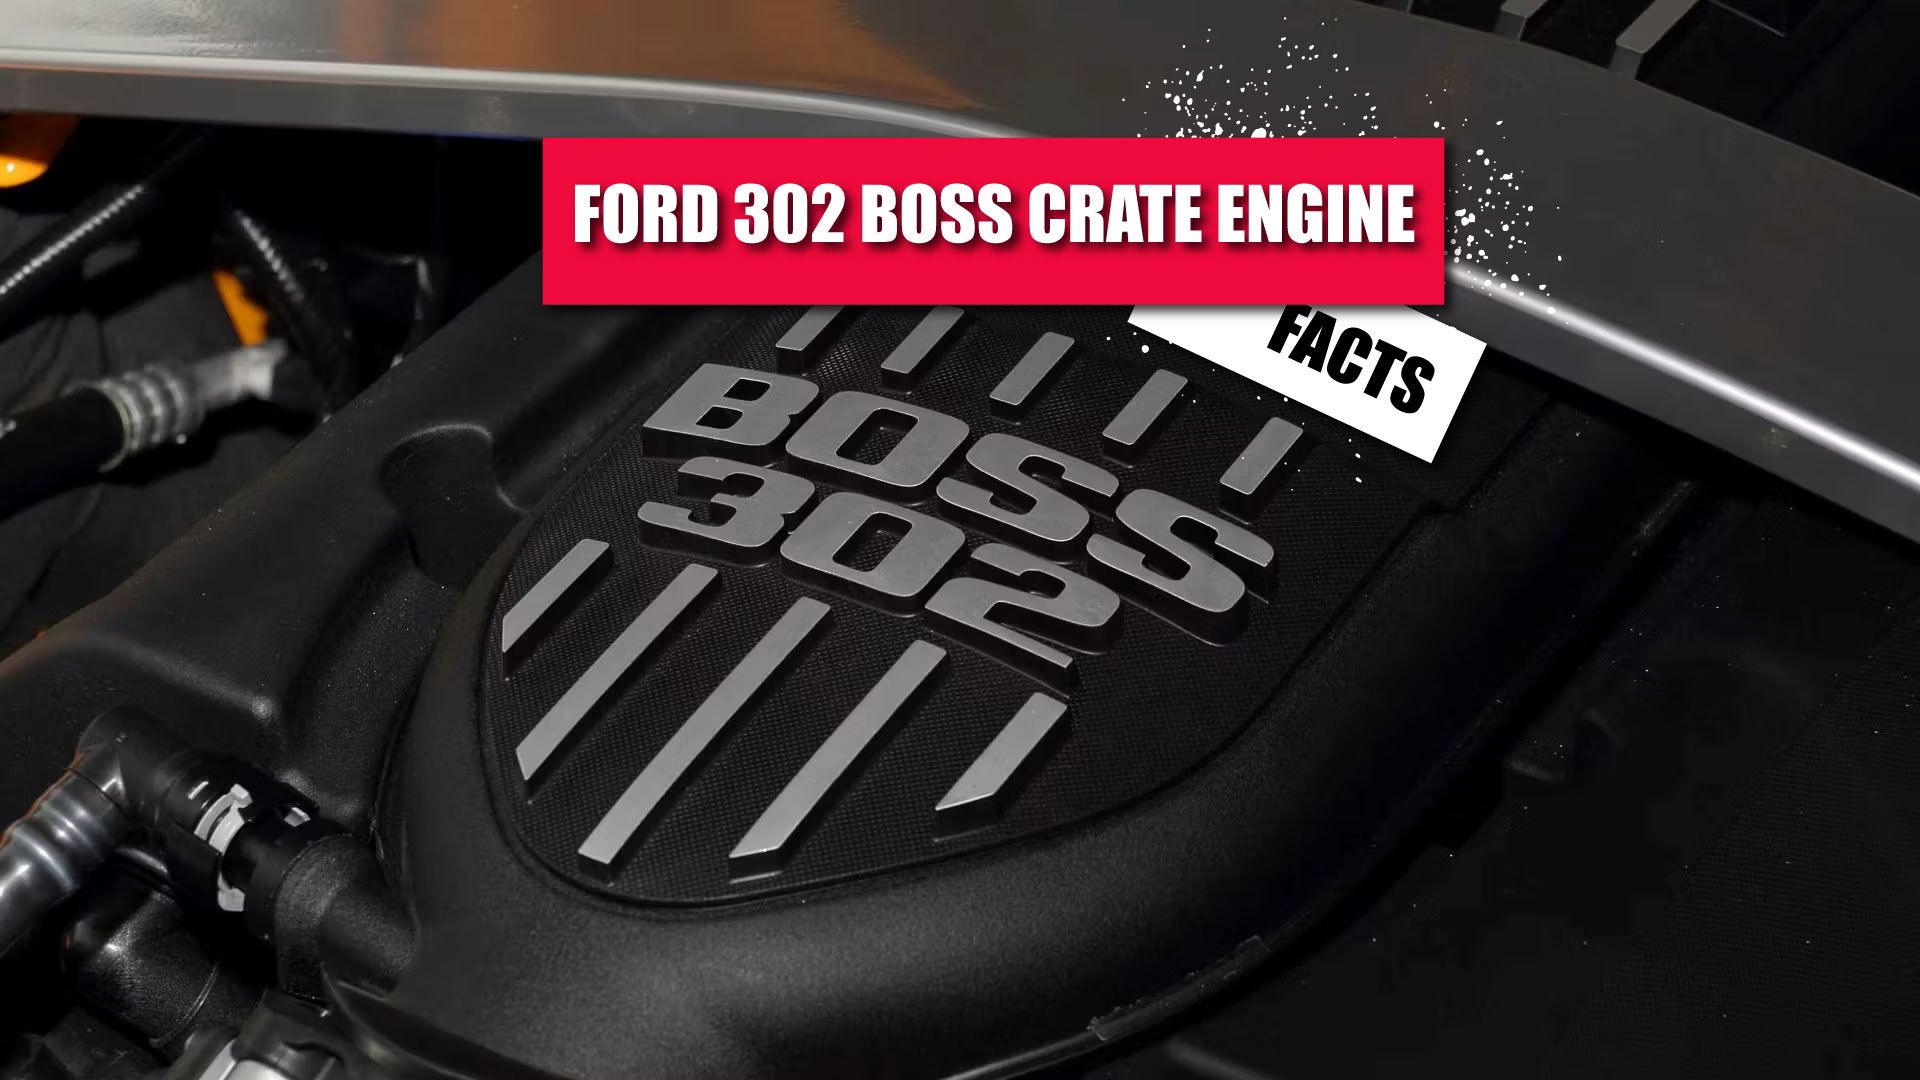 Ford Boss 302 Engine Featured Image